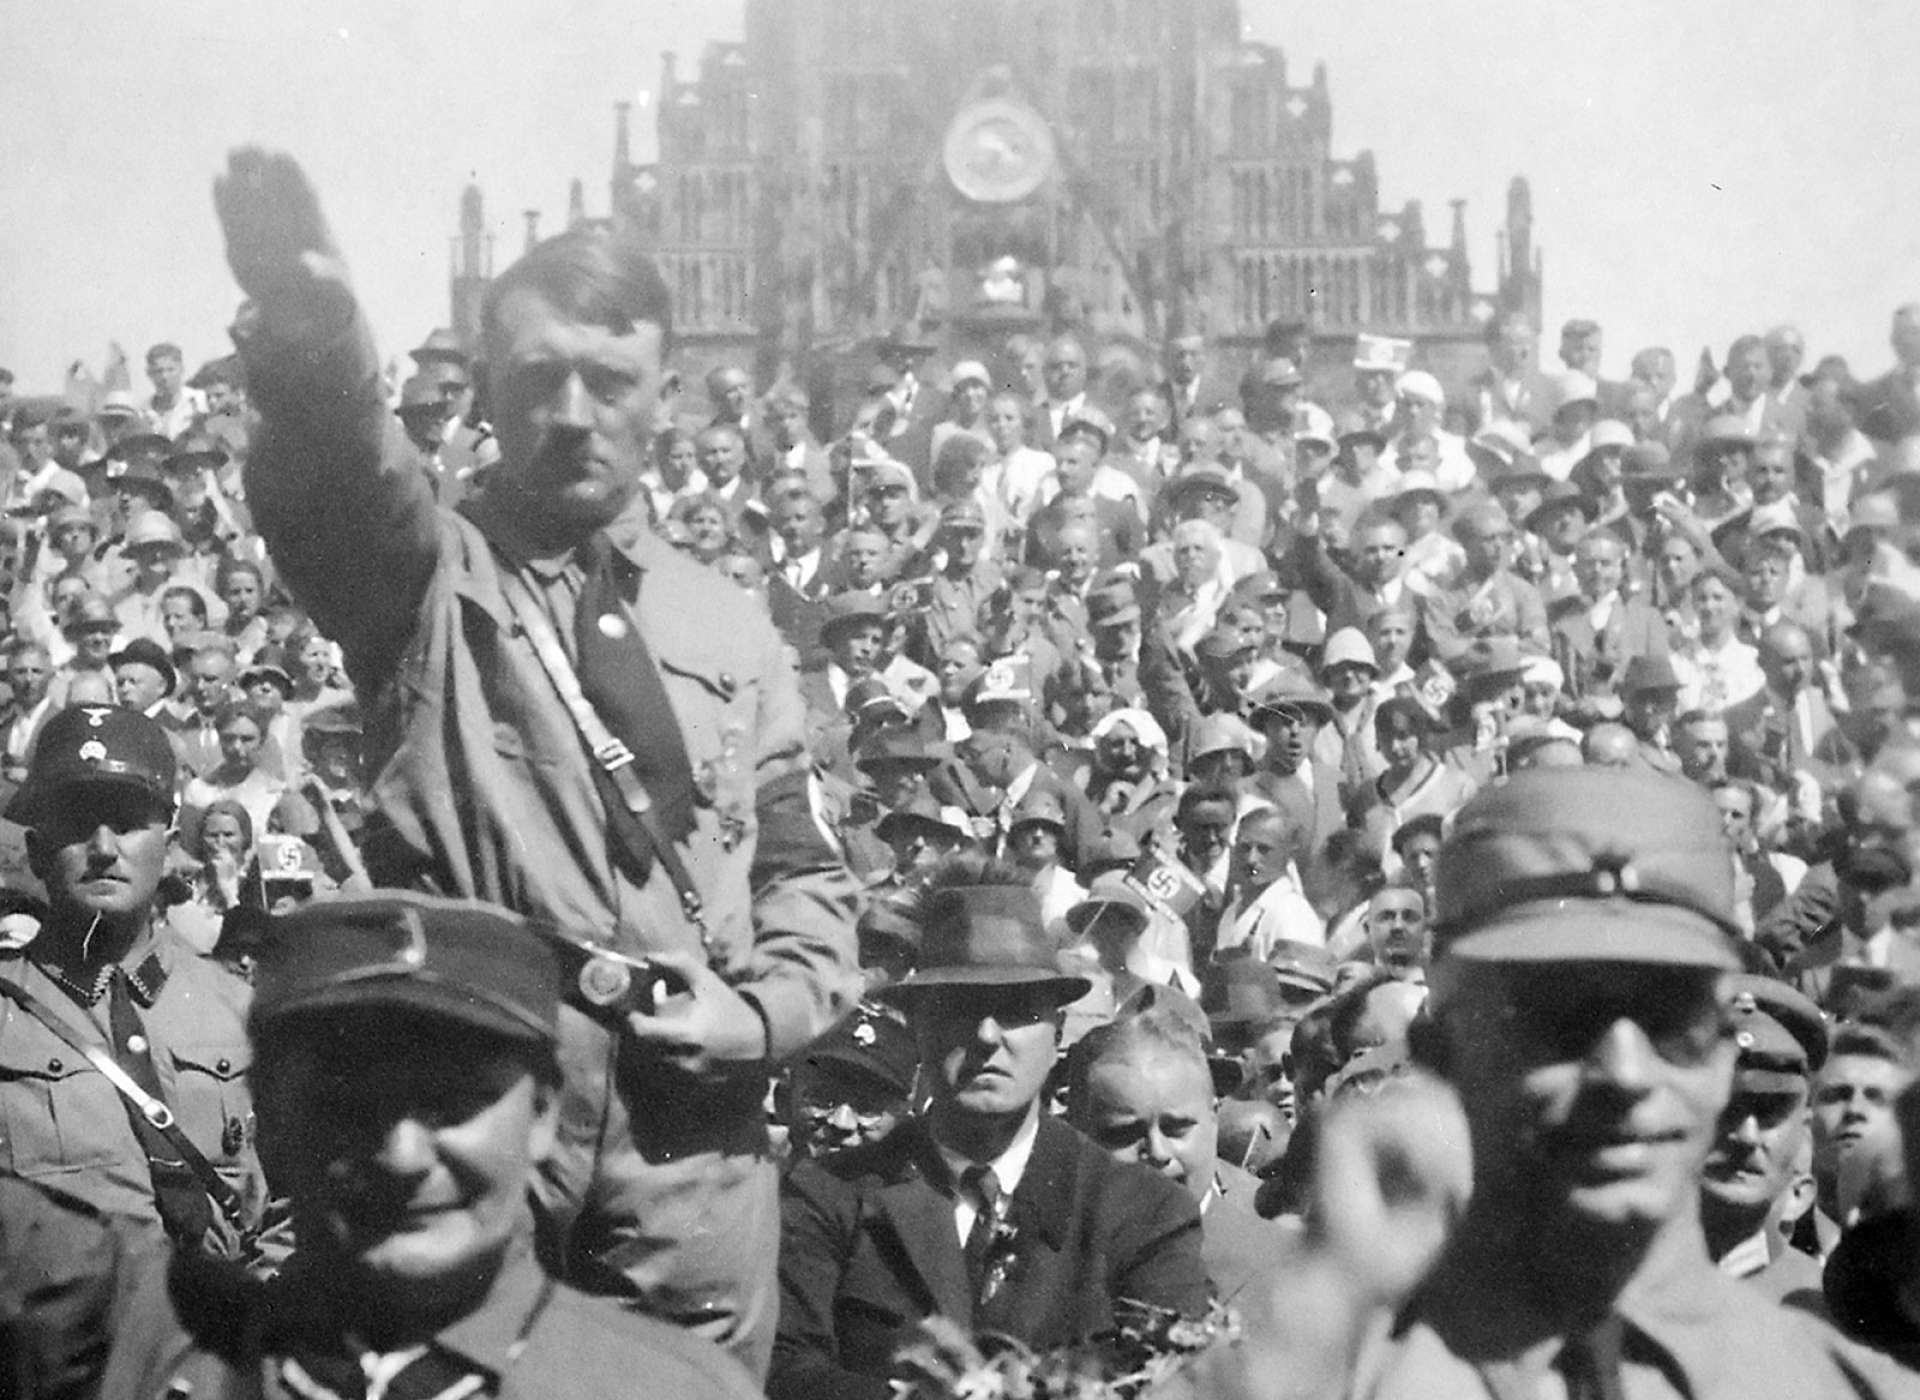 how did hitler violate human rights